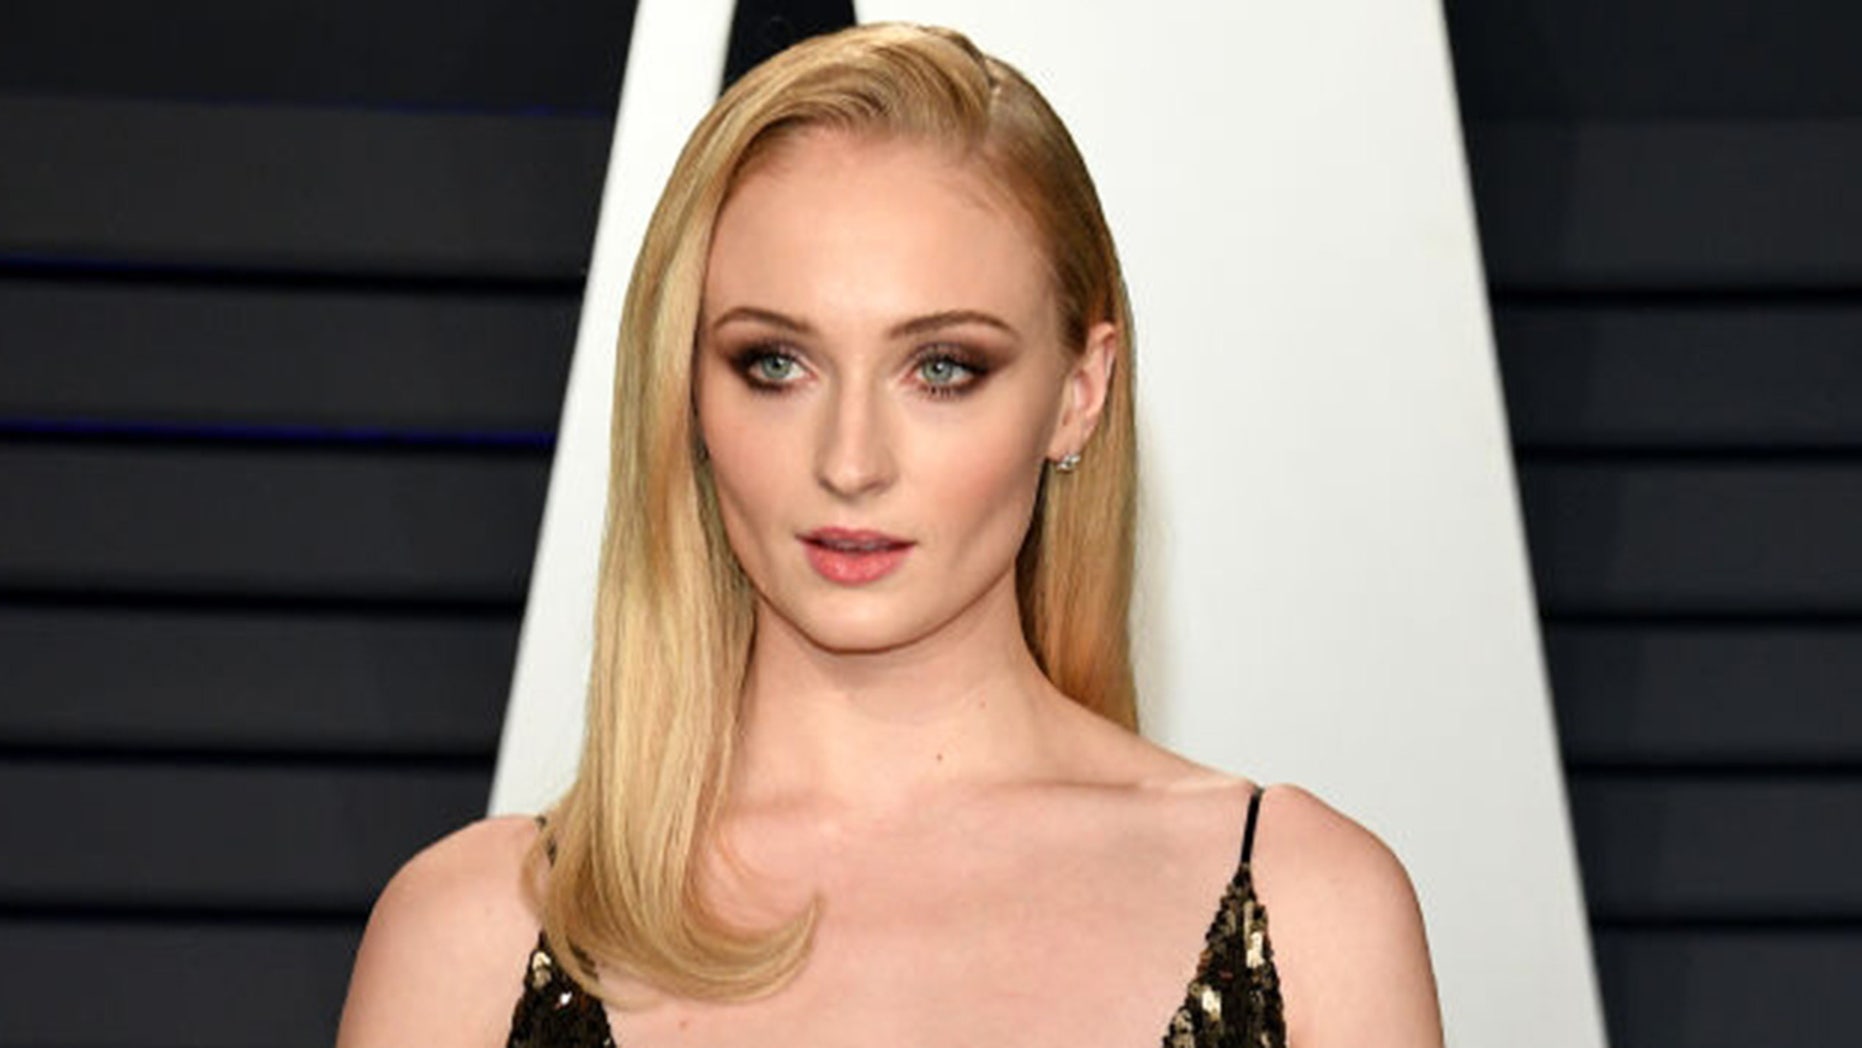 Sophie Turner participates in the 2019 Oscars at the Vanity Fair.